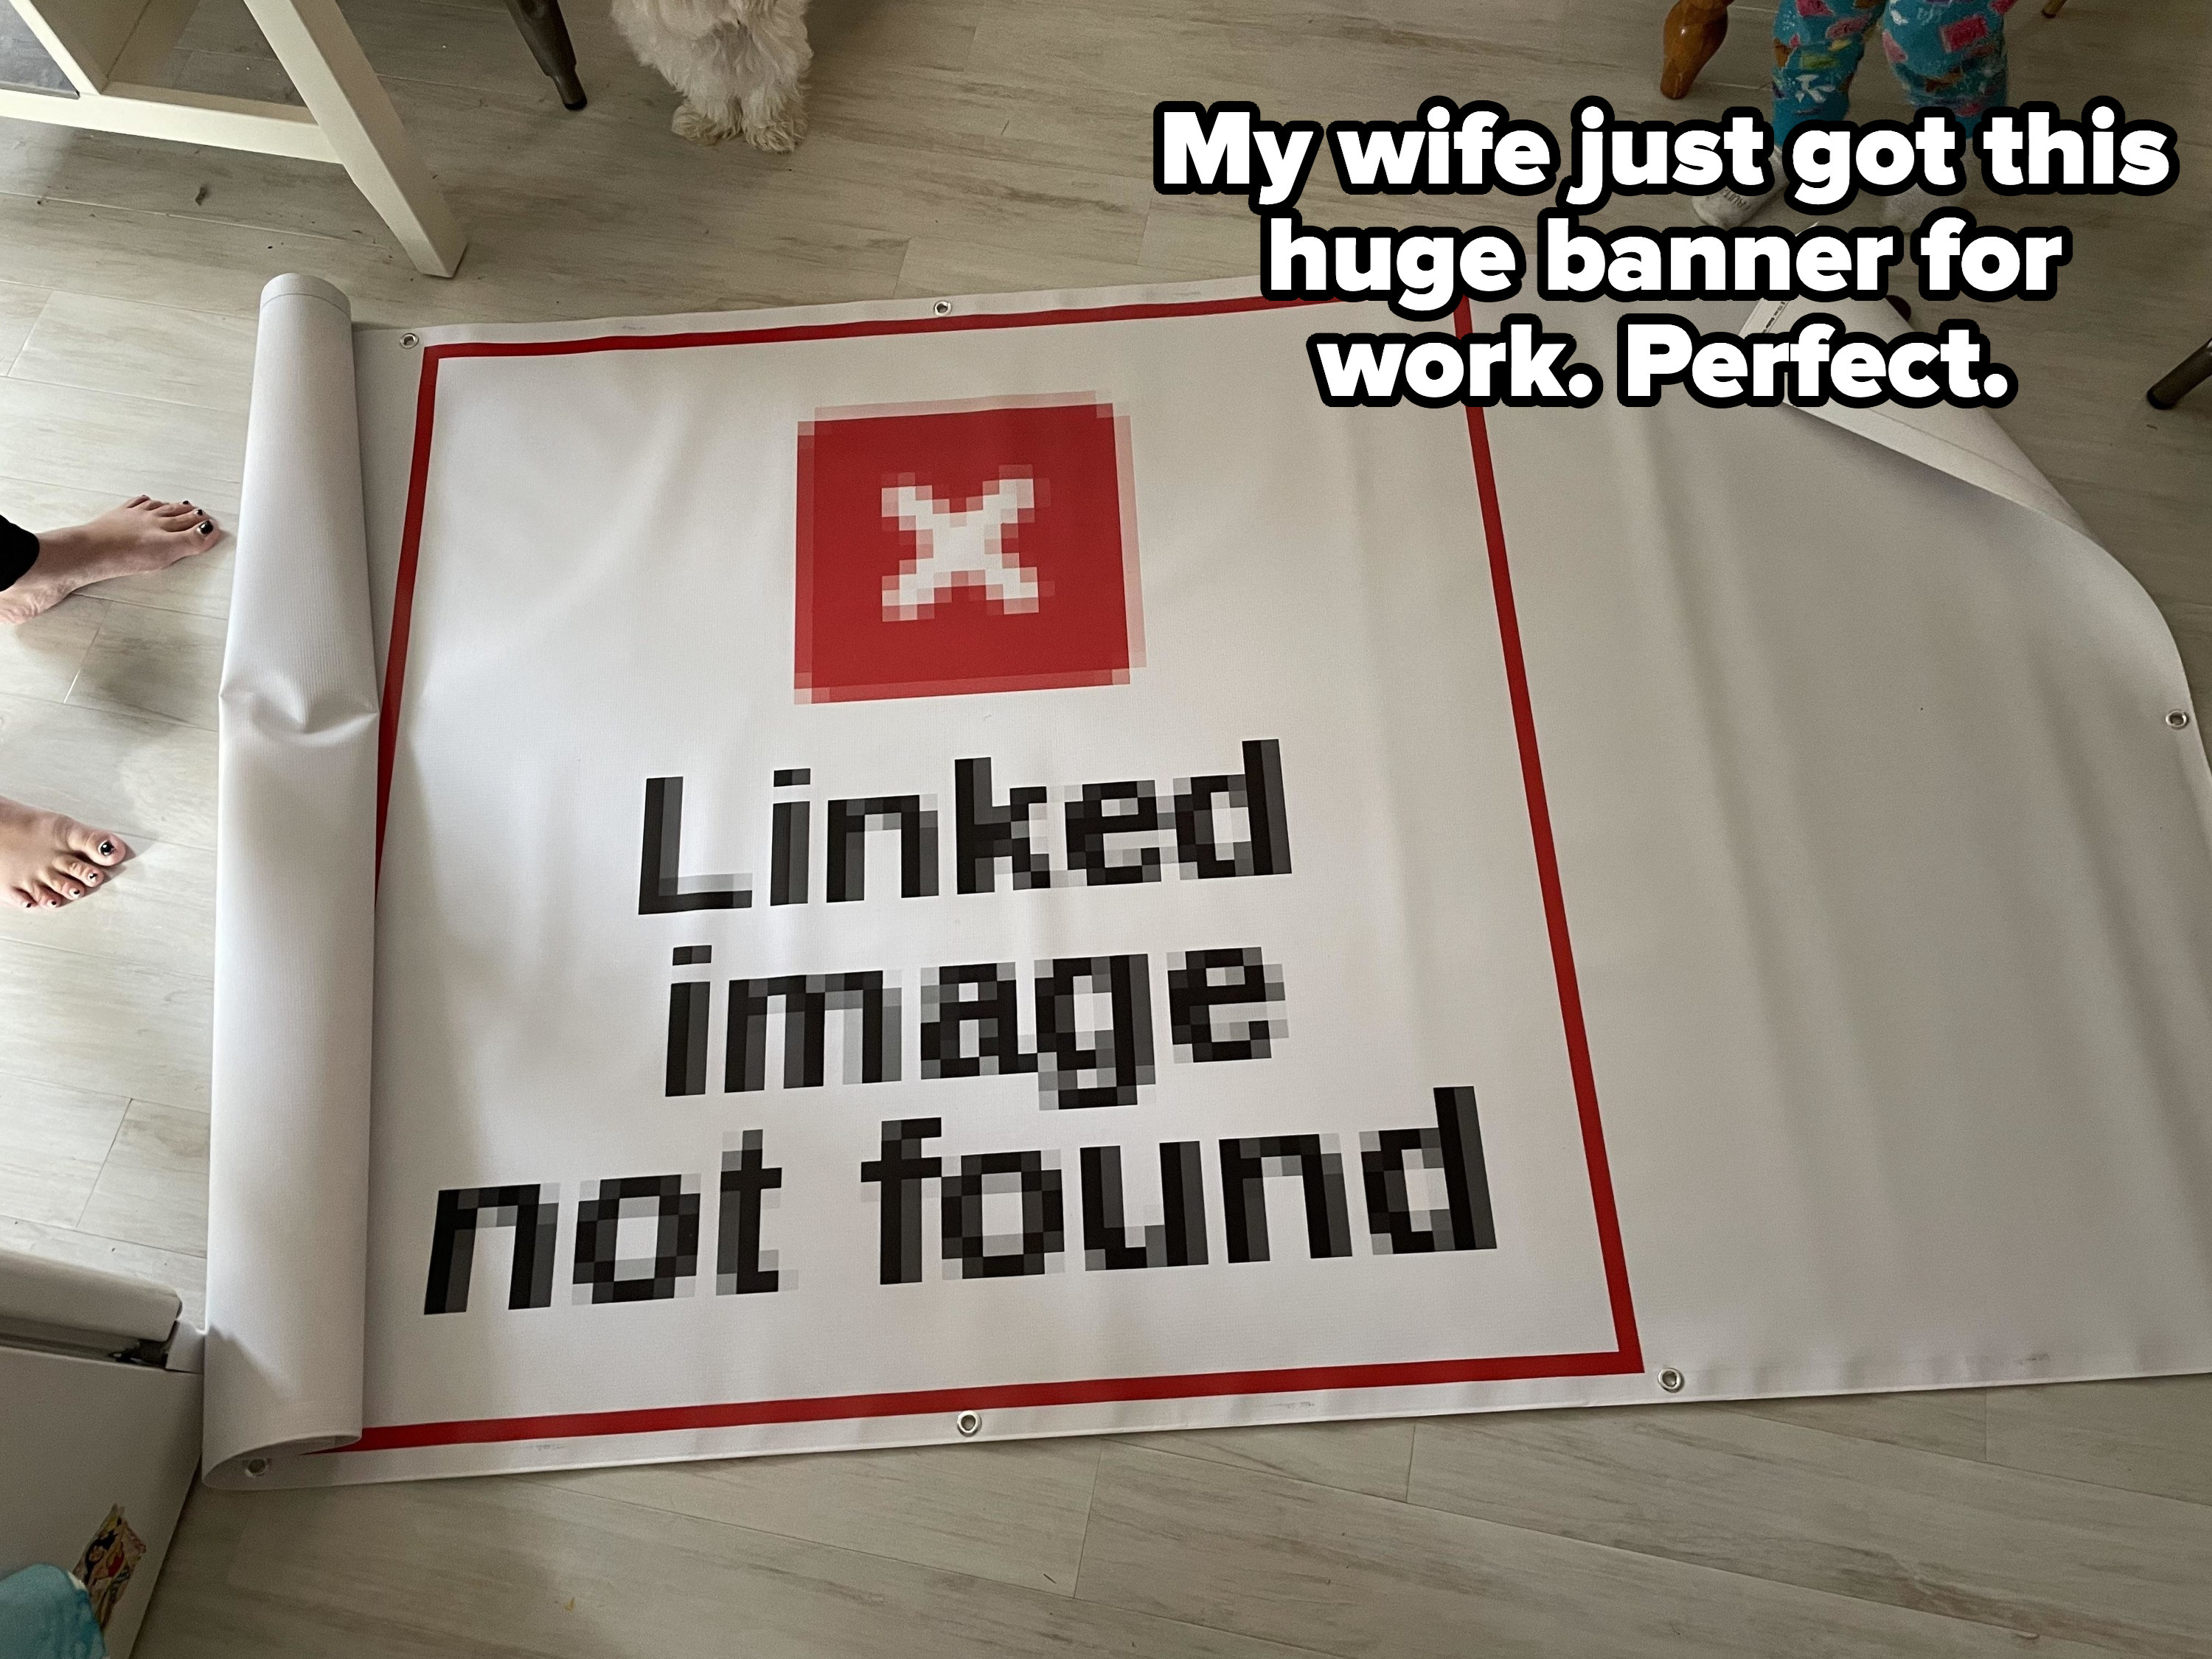 &quot;Linked image not found&quot;